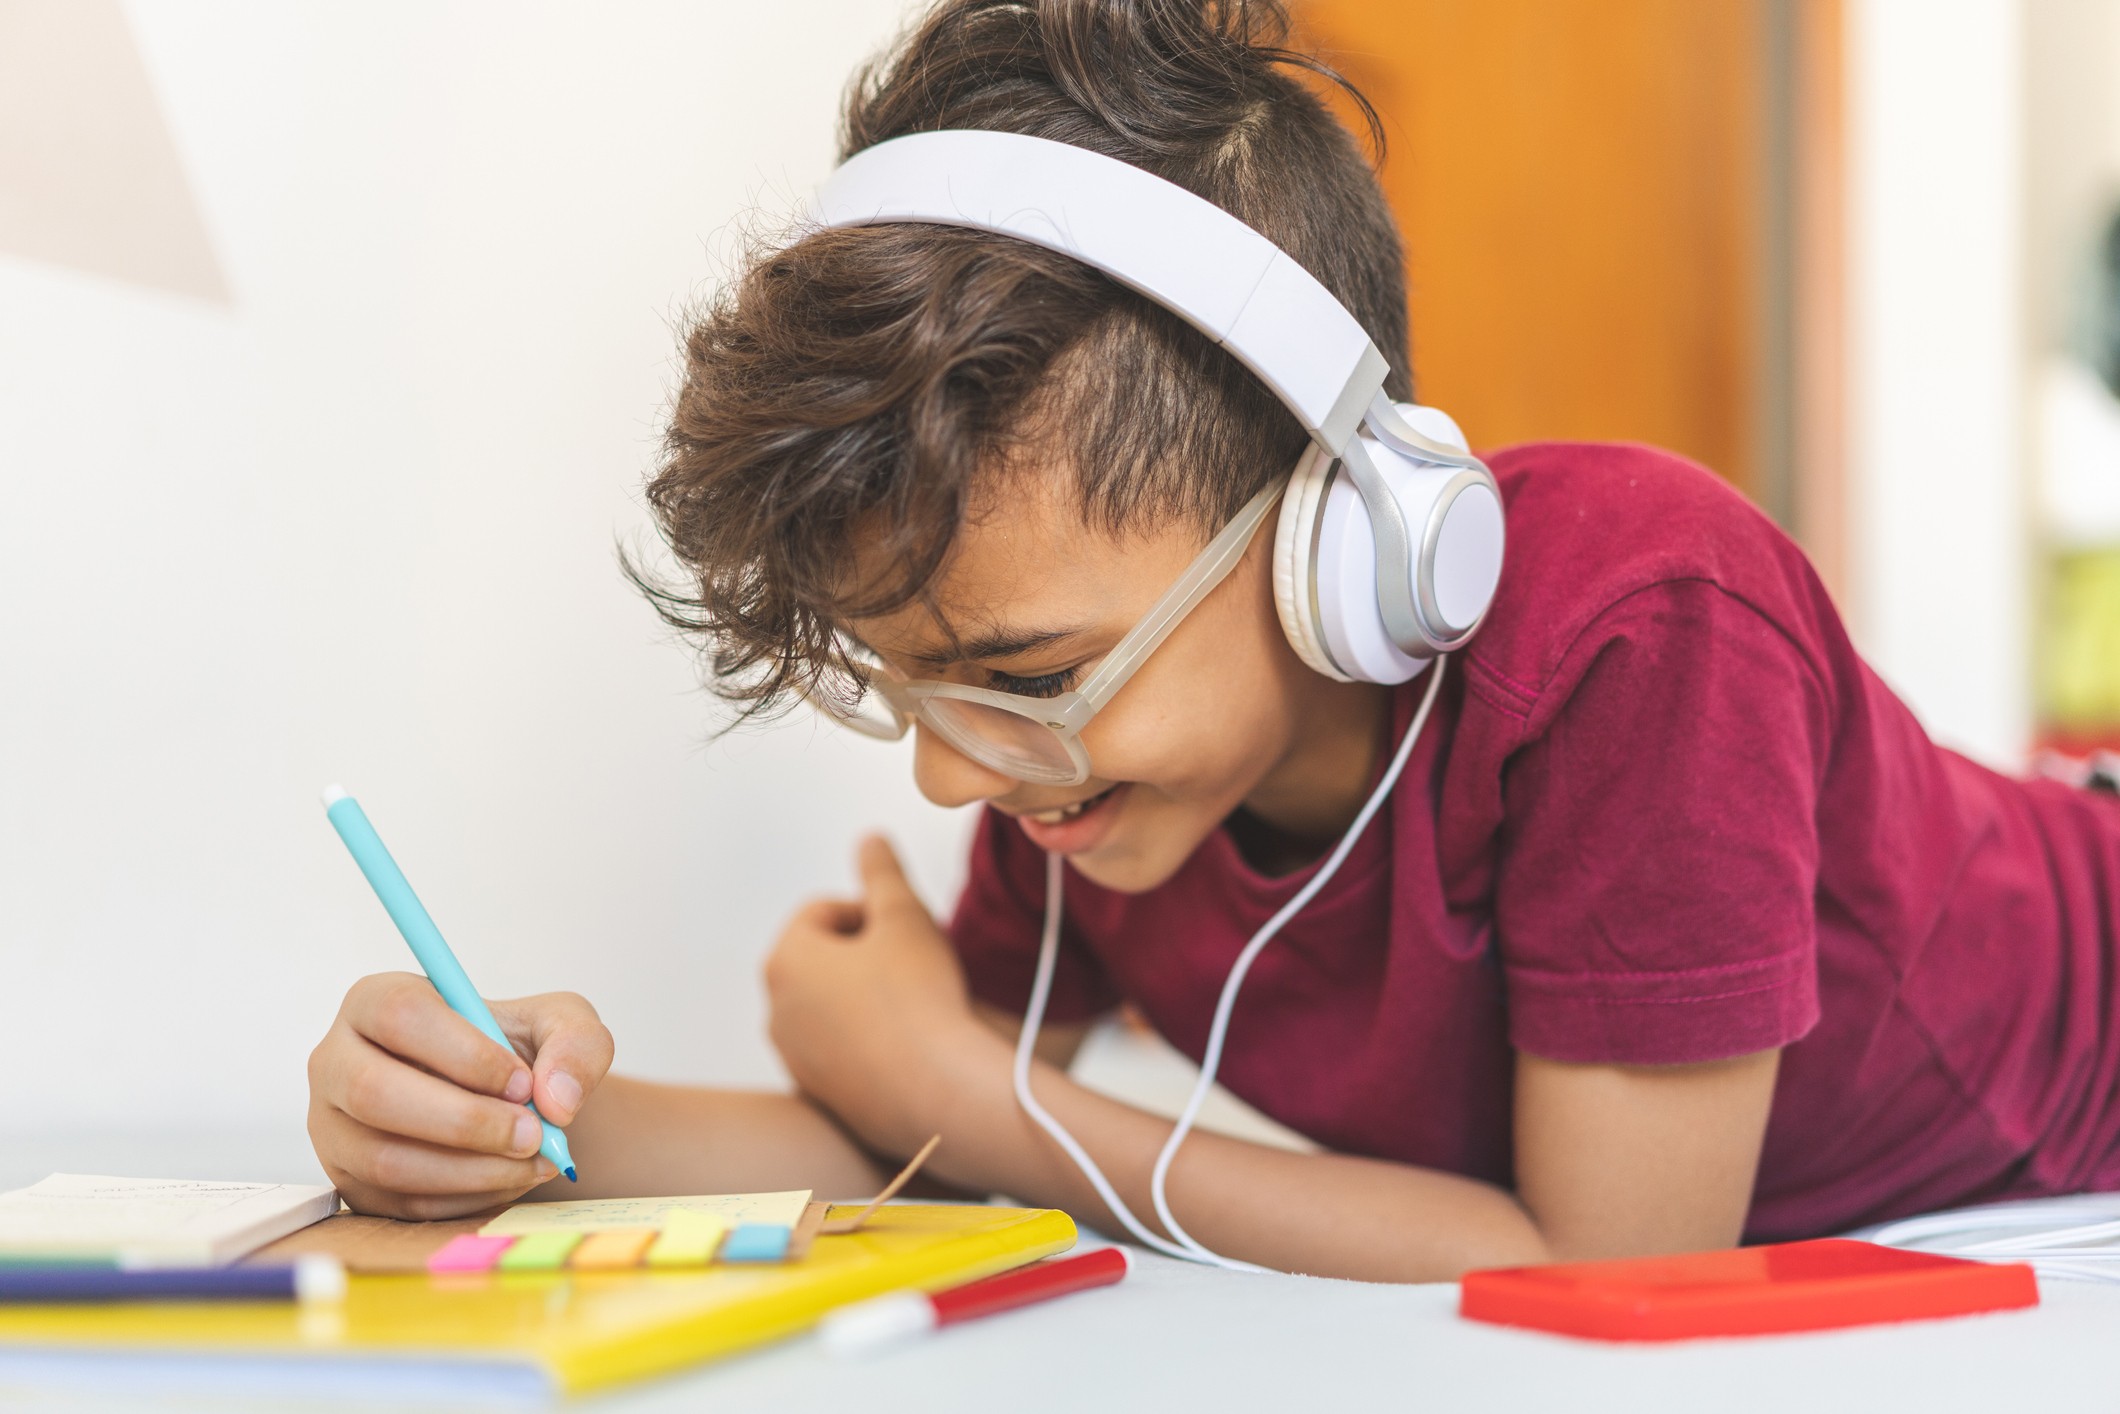 Child listening to headphones and smiling while writing notes. 